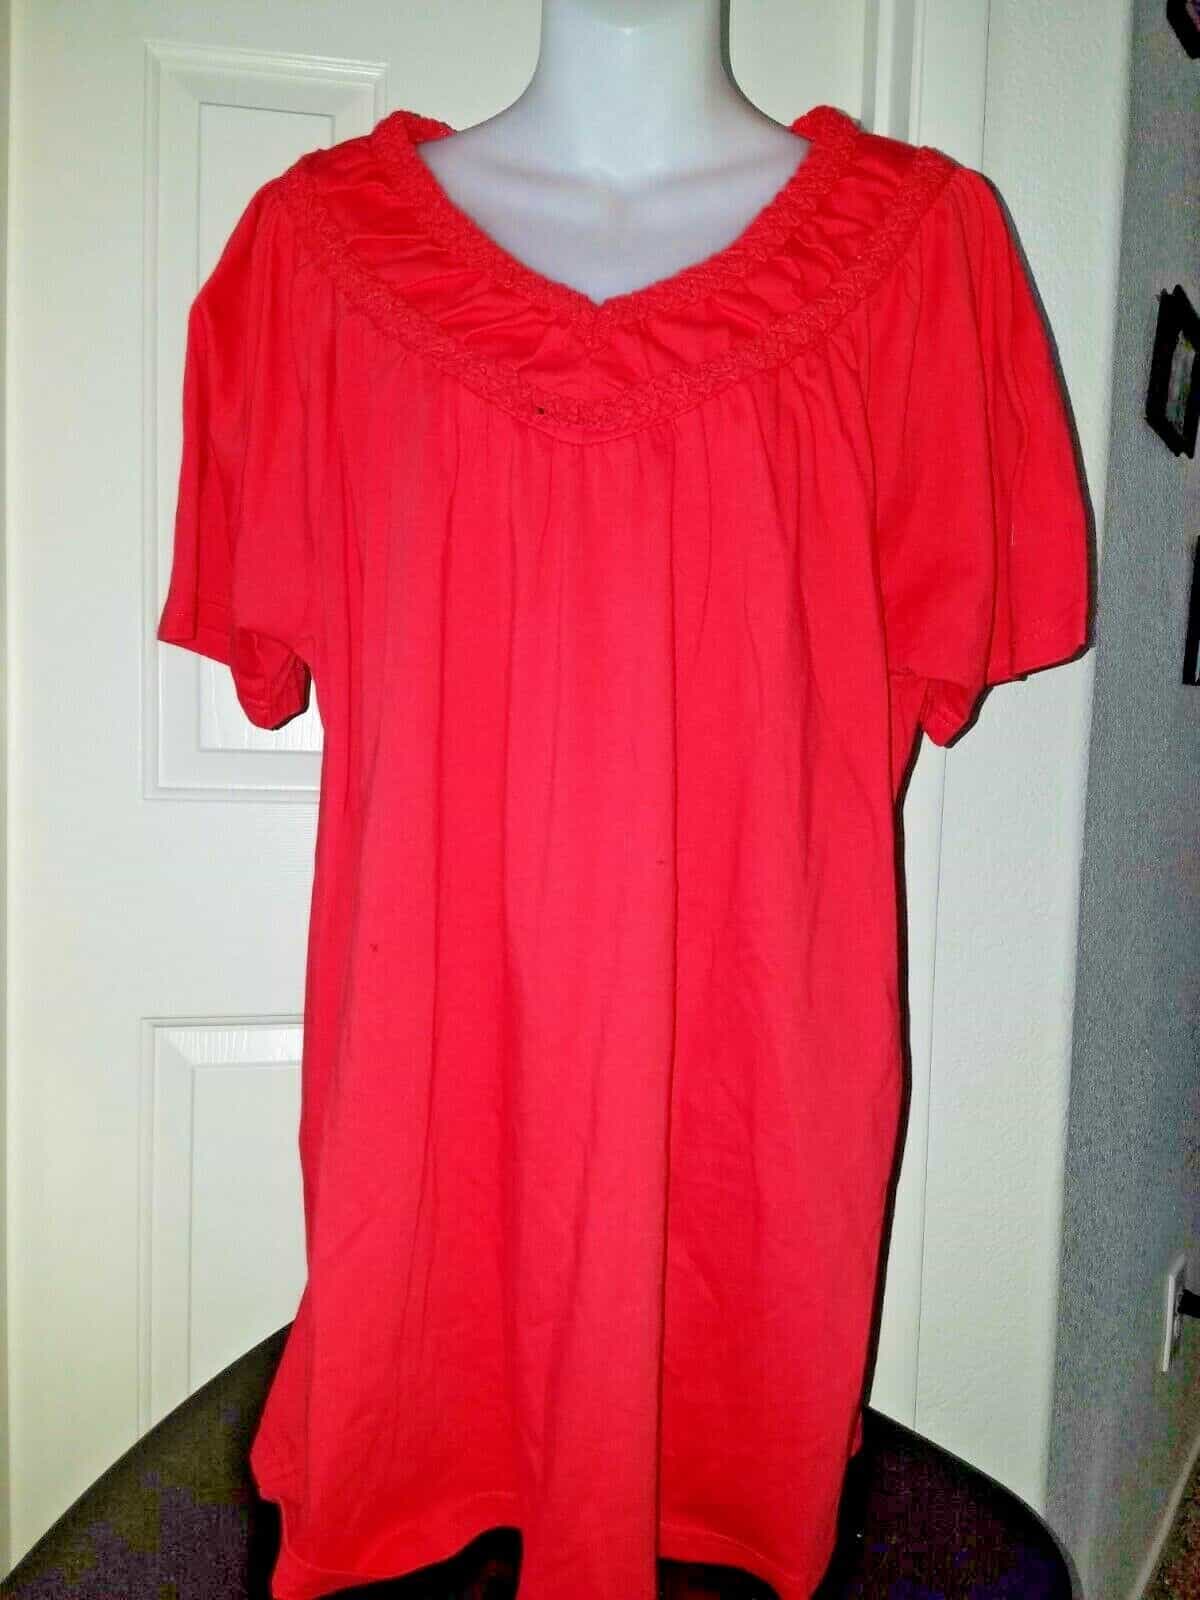 Only Necessities Women’s Blouse Red Size Large